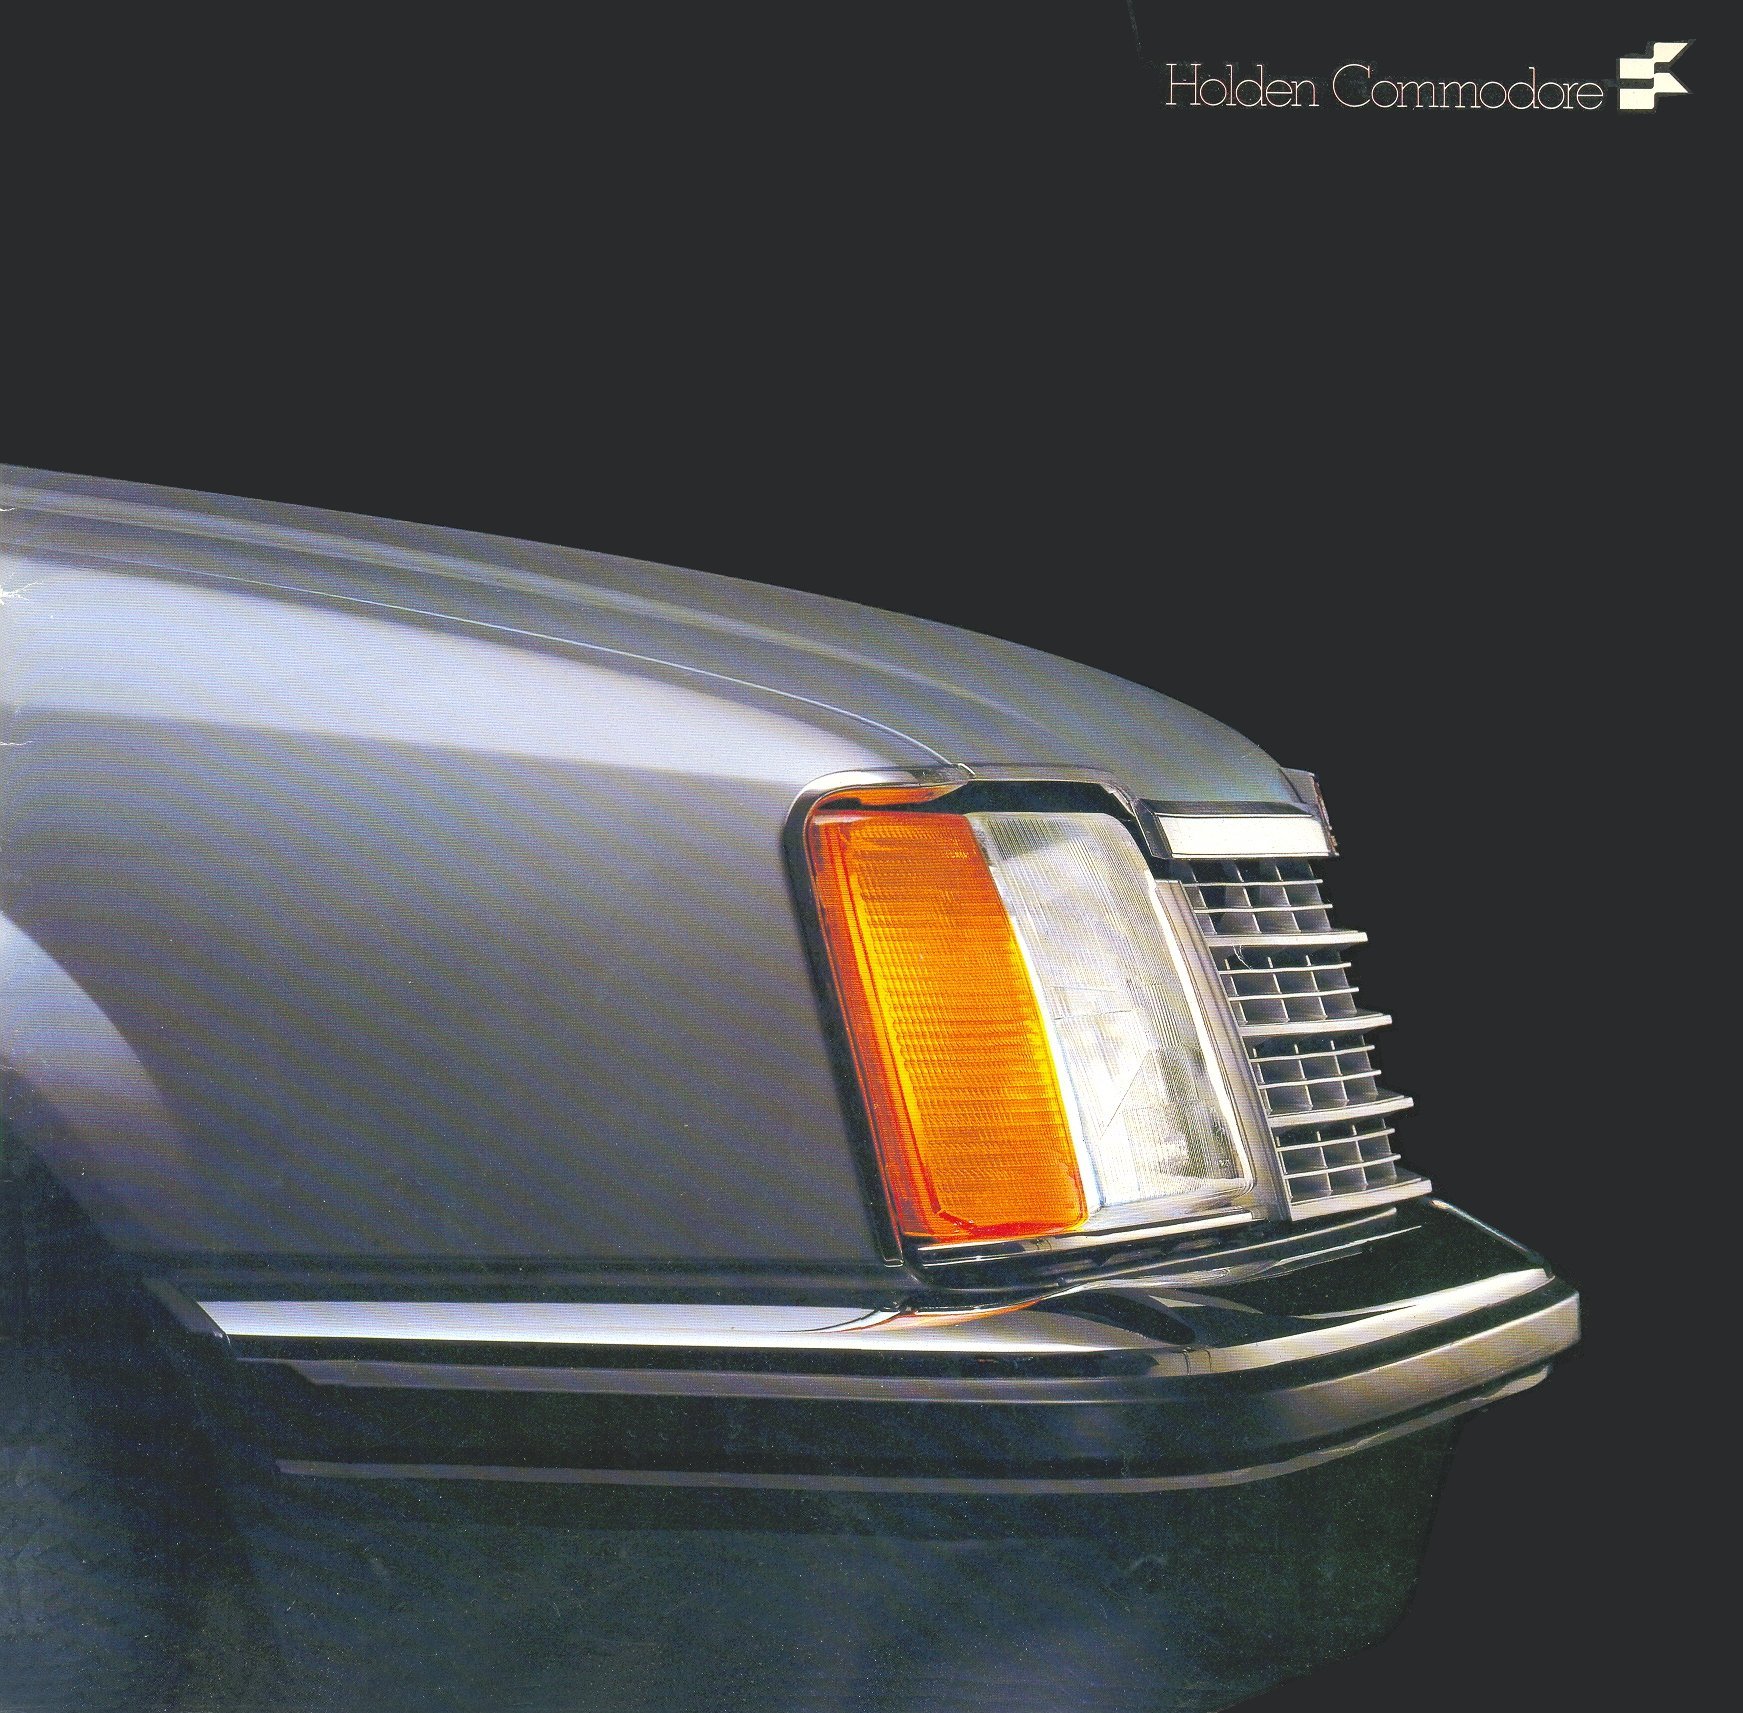 1978 Holden Commodore Brochure Page 5